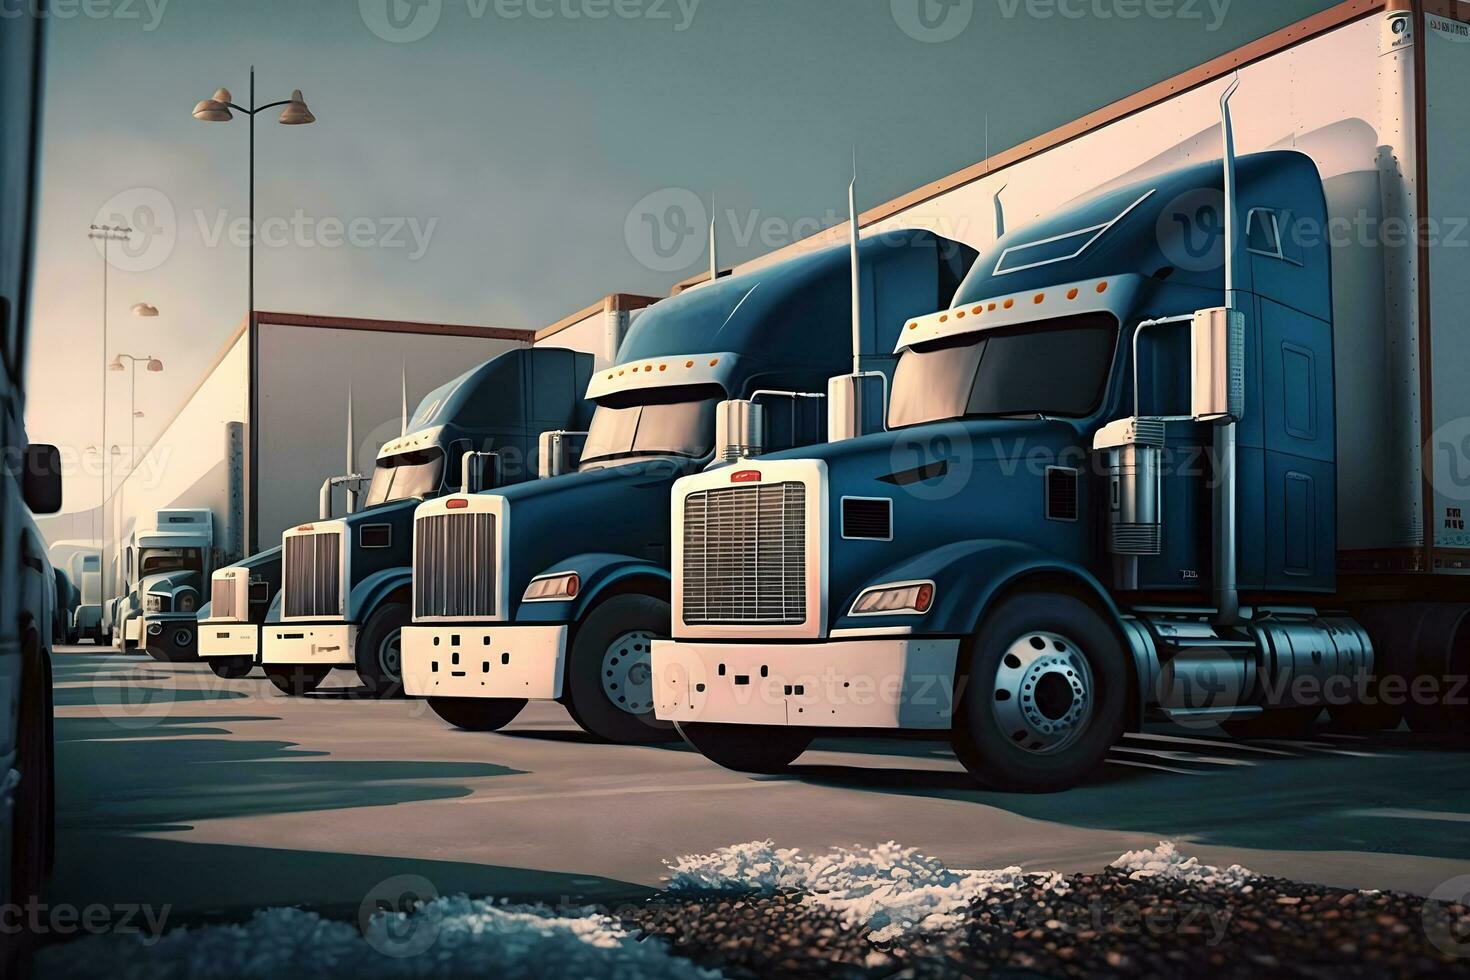 Semi Trailer Trucks on Parking lot. Delivery Trucks for Cargo Shipping. Lorry Industry Freight Truck Logistics Transport. Neural network generated art photo